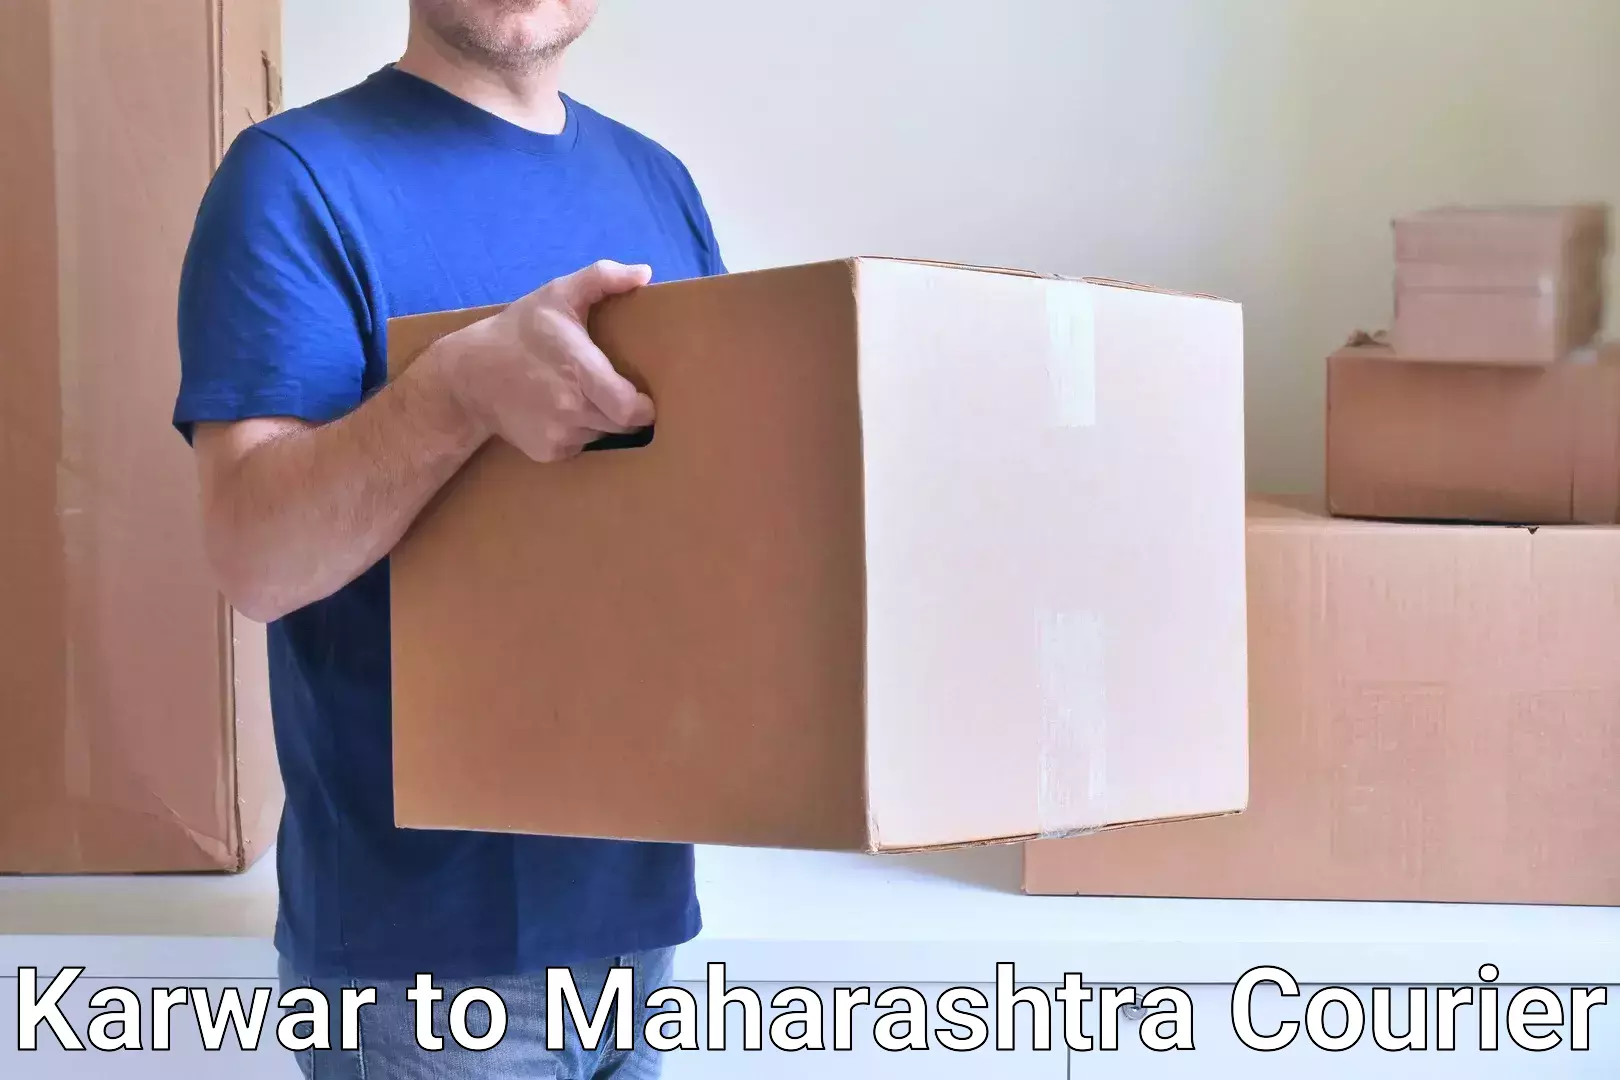 Cost-effective shipping solutions Karwar to Latur